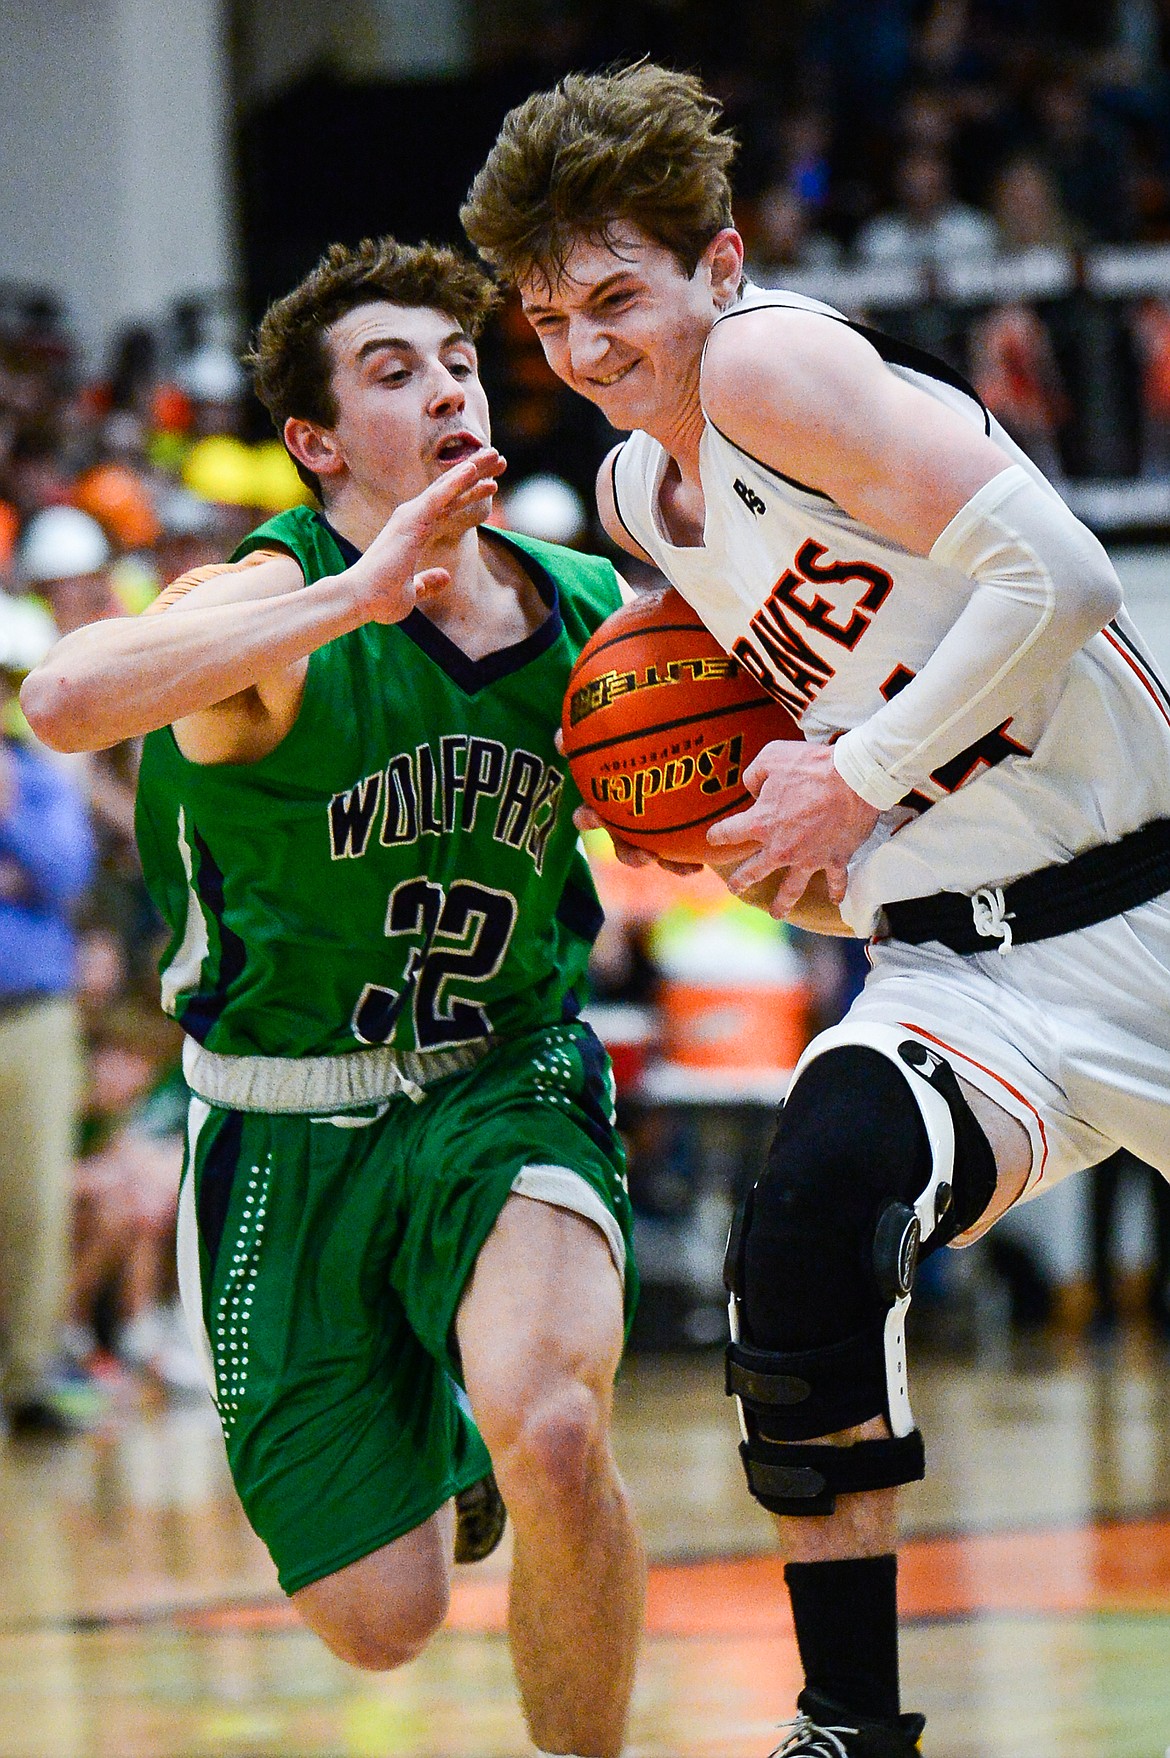 Flathead's Joston Cripe (34) is fouled on his way to the basket by Glacier's Jake Turner (32) at Flathead High School on Friday, Jan. 21. (Casey Kreider/Daily Inter Lake)